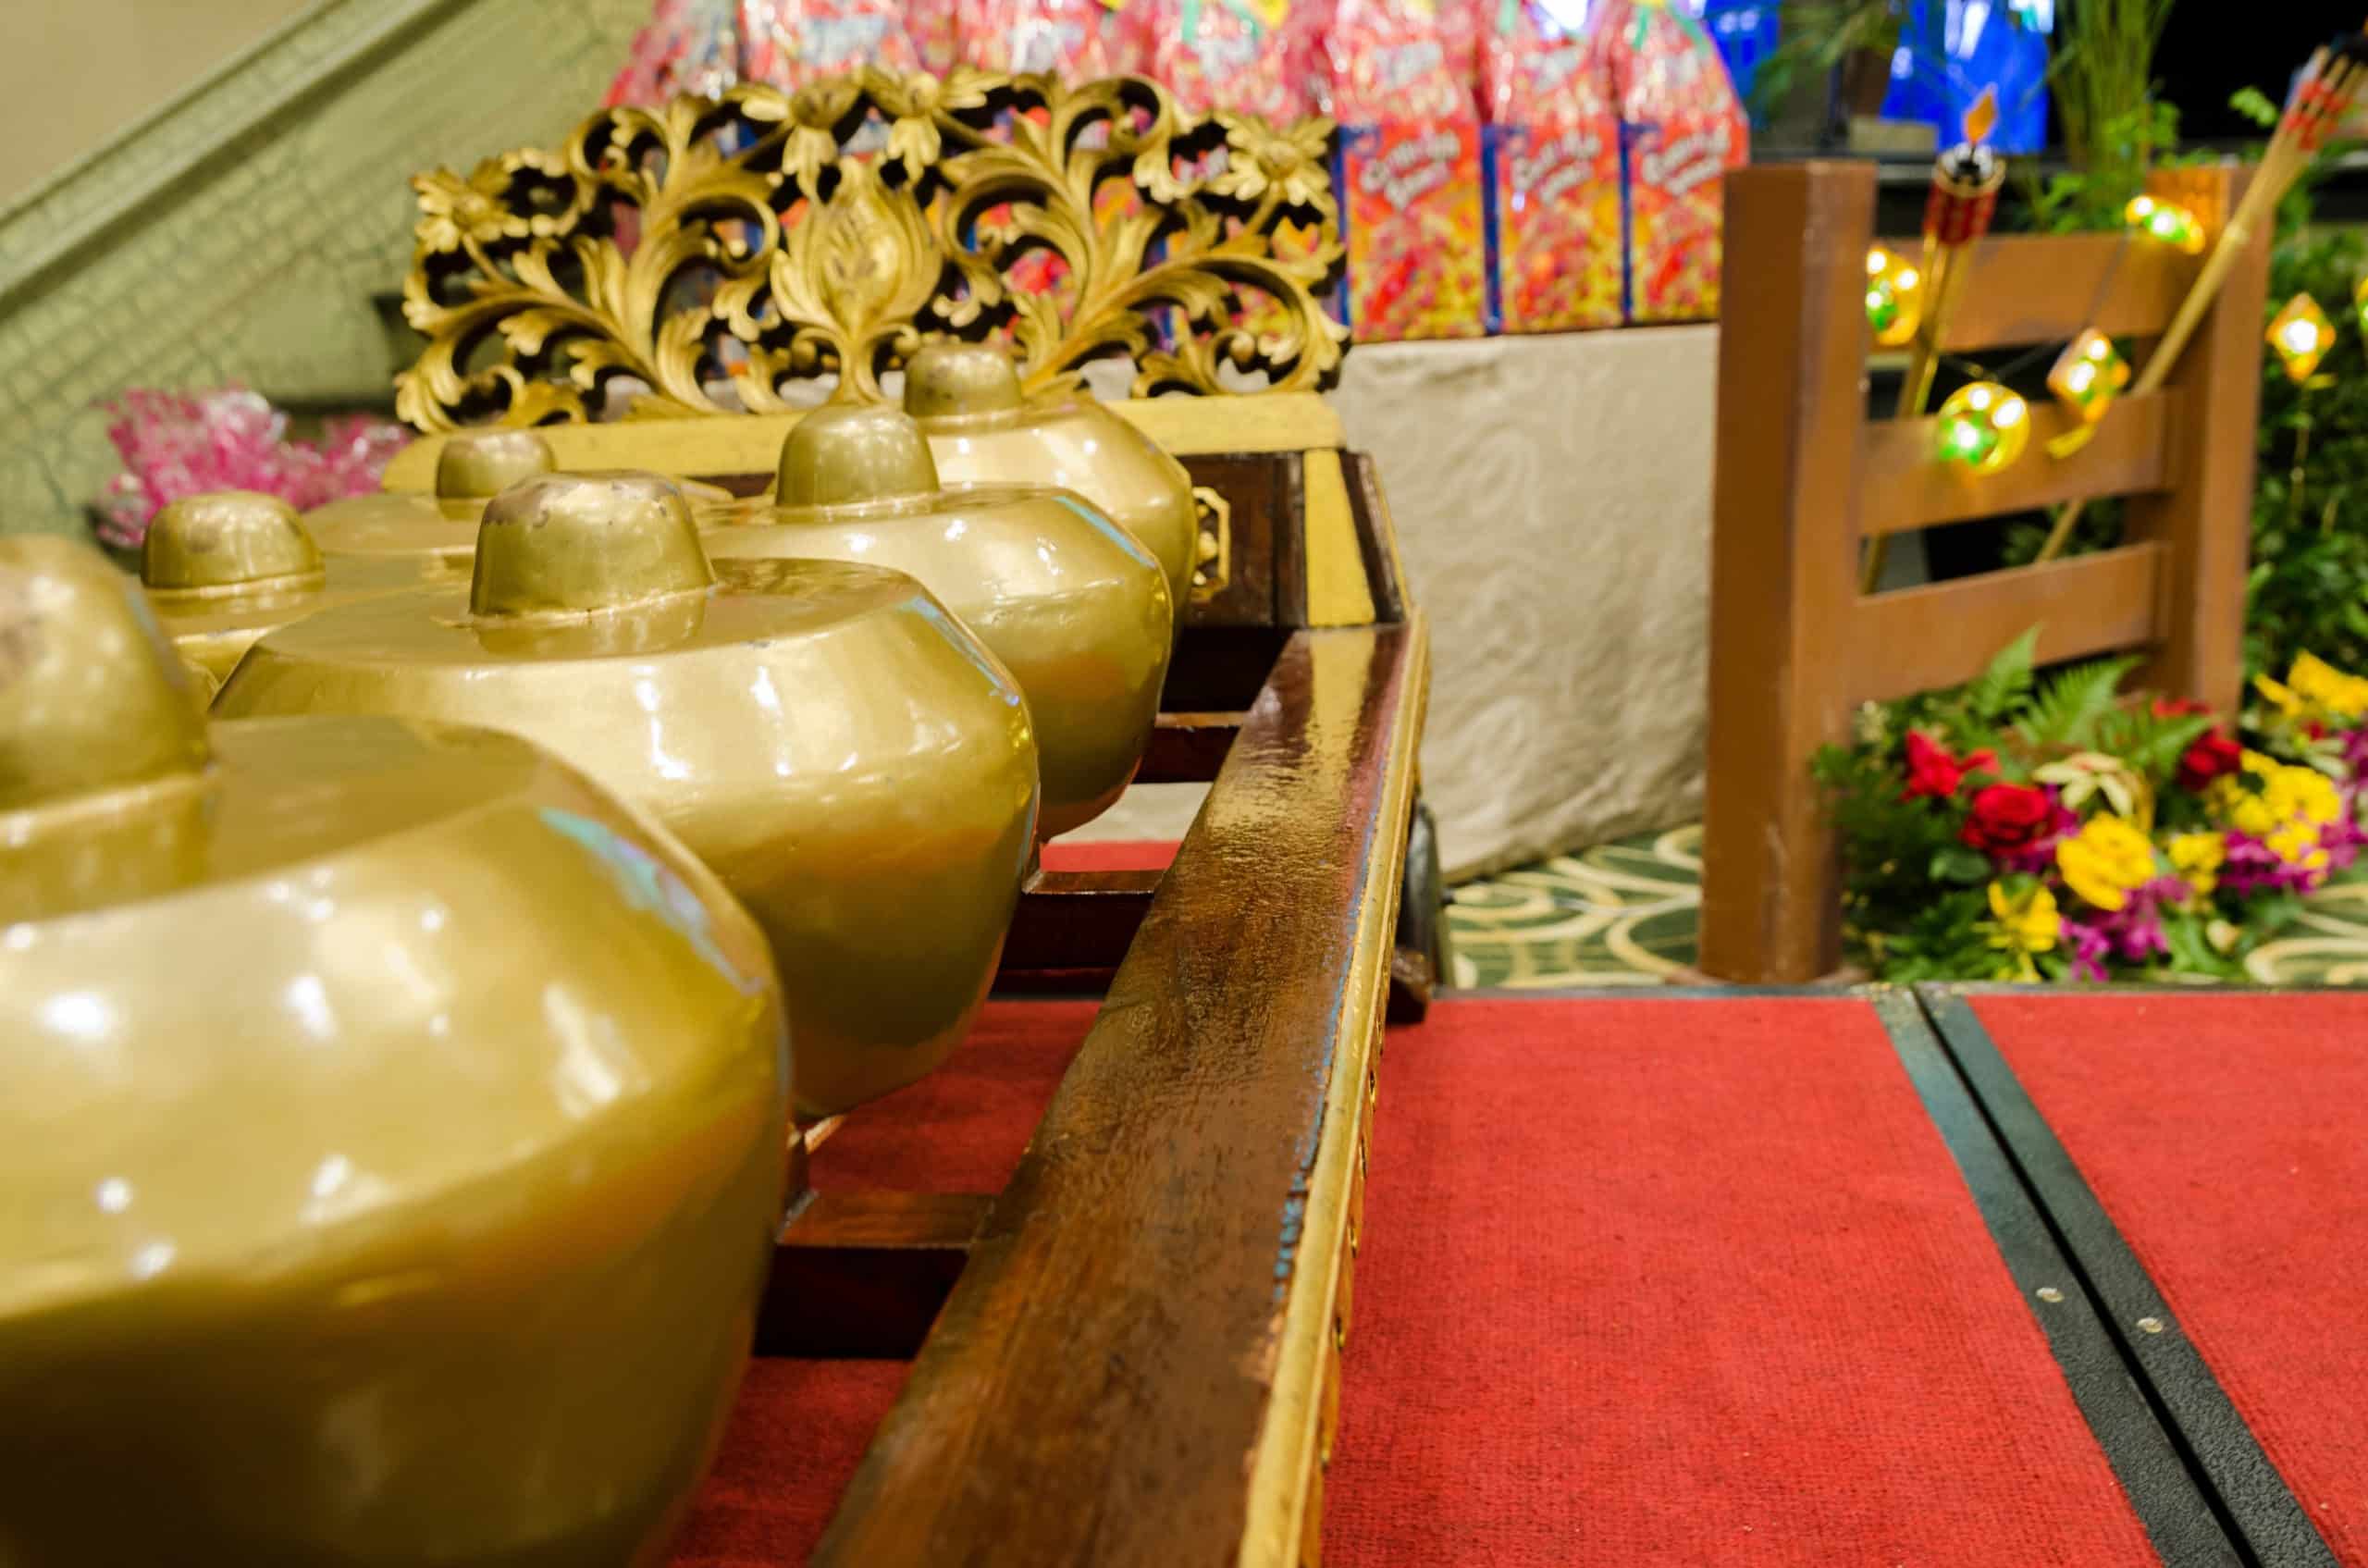 Set of Gamelan is traditional malay heritage music instrument.